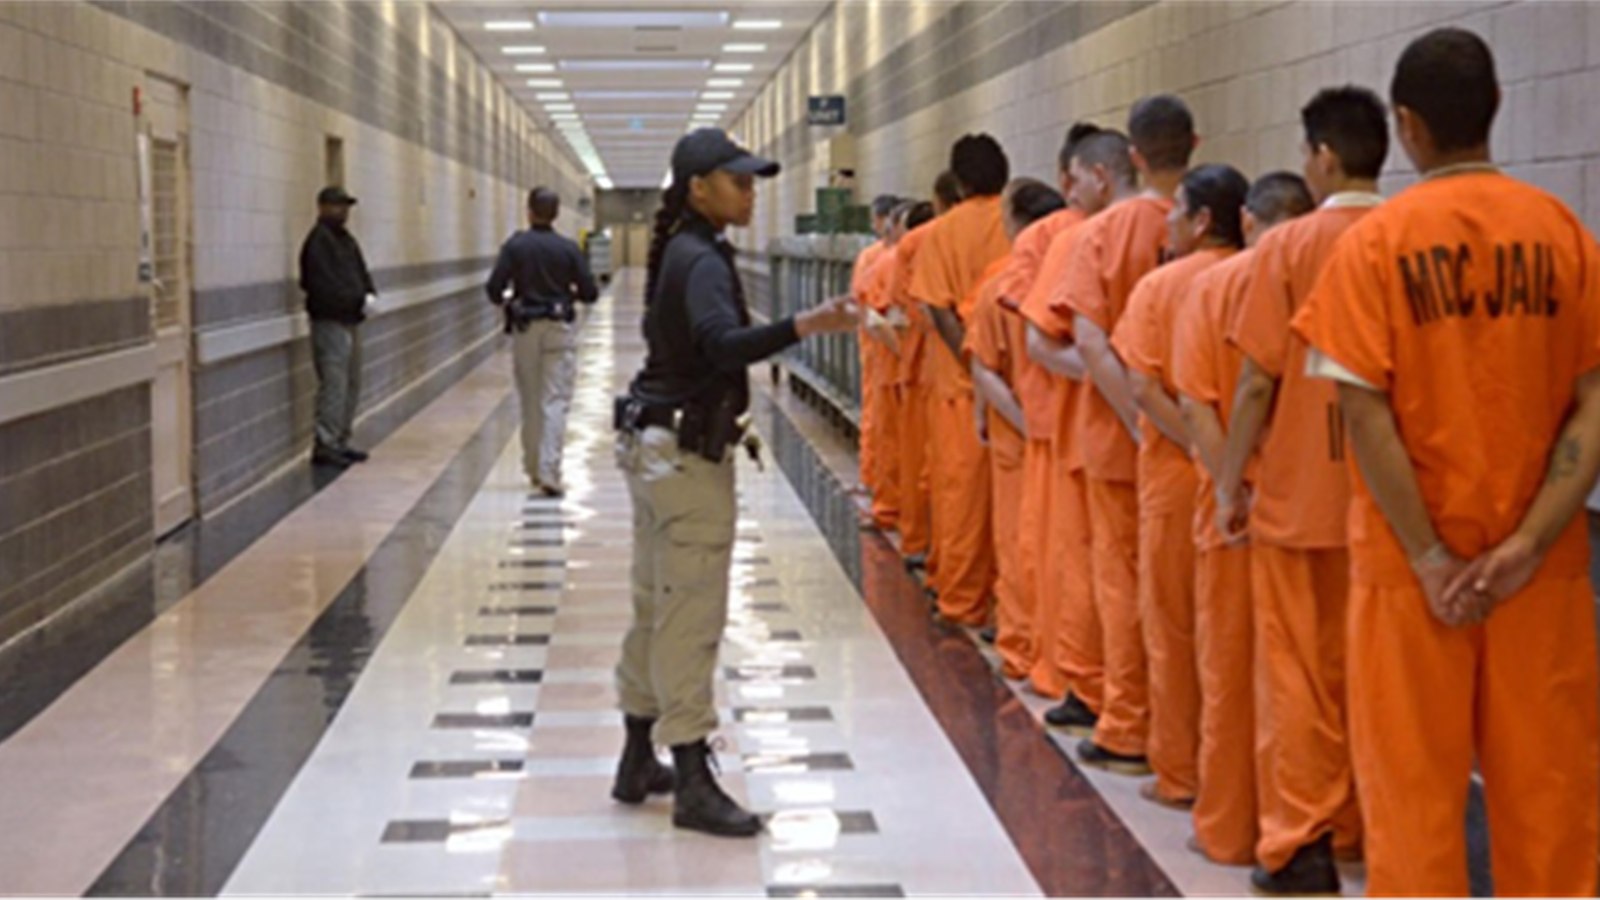 2 NM COs indicted in 2019 inmate death